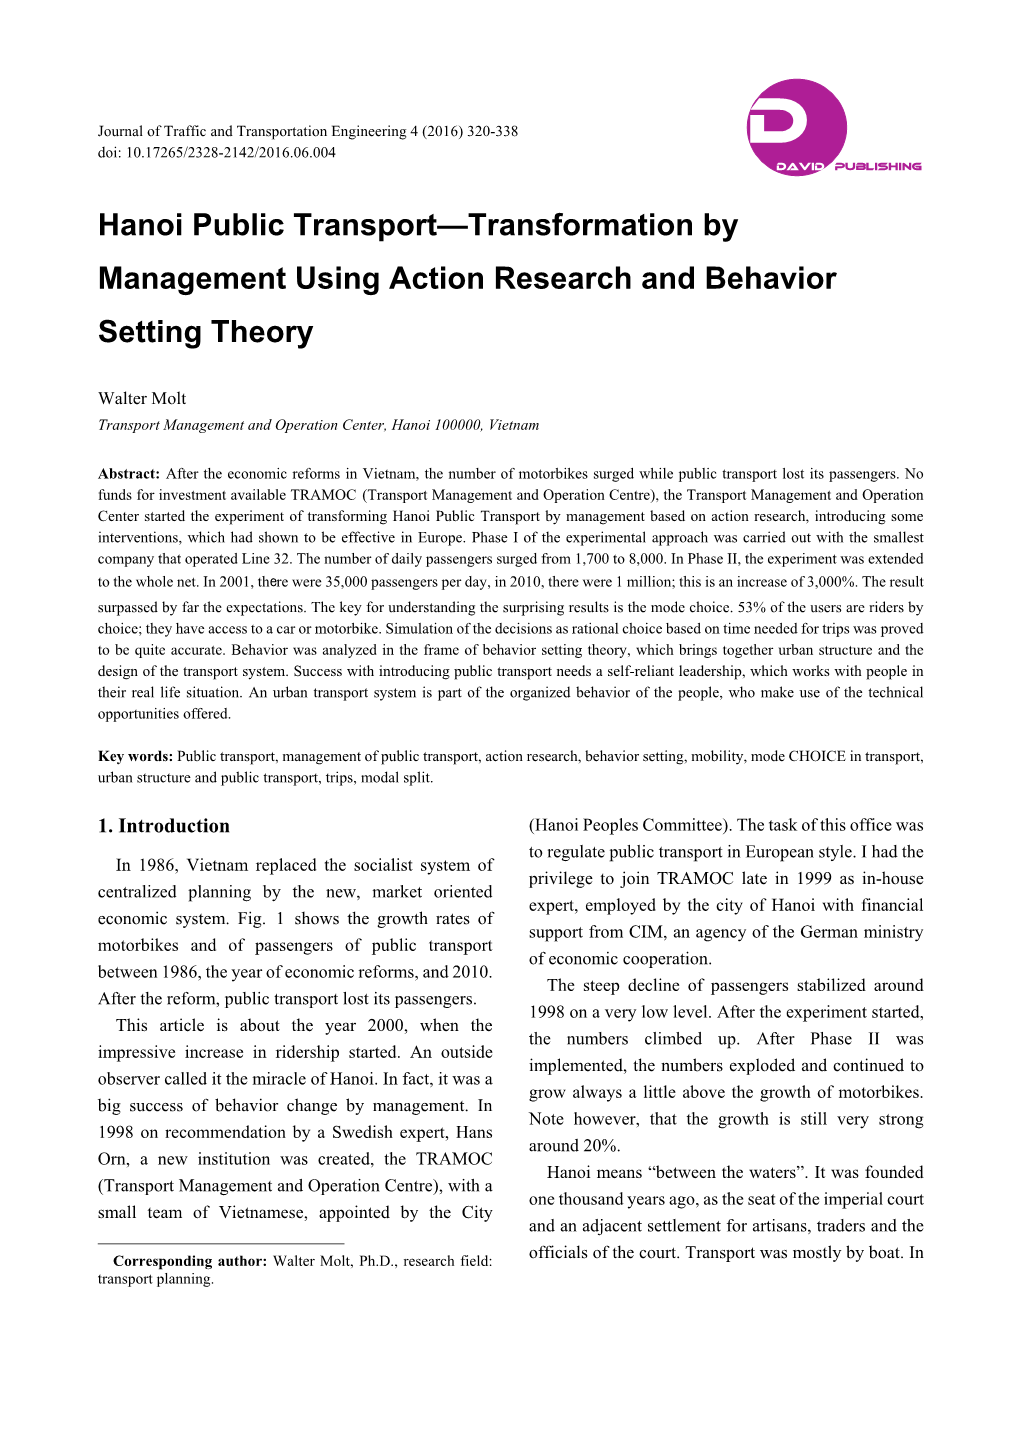 Hanoi Public Transport—Transformation by Management Using Action Research and Behavior Setting Theory